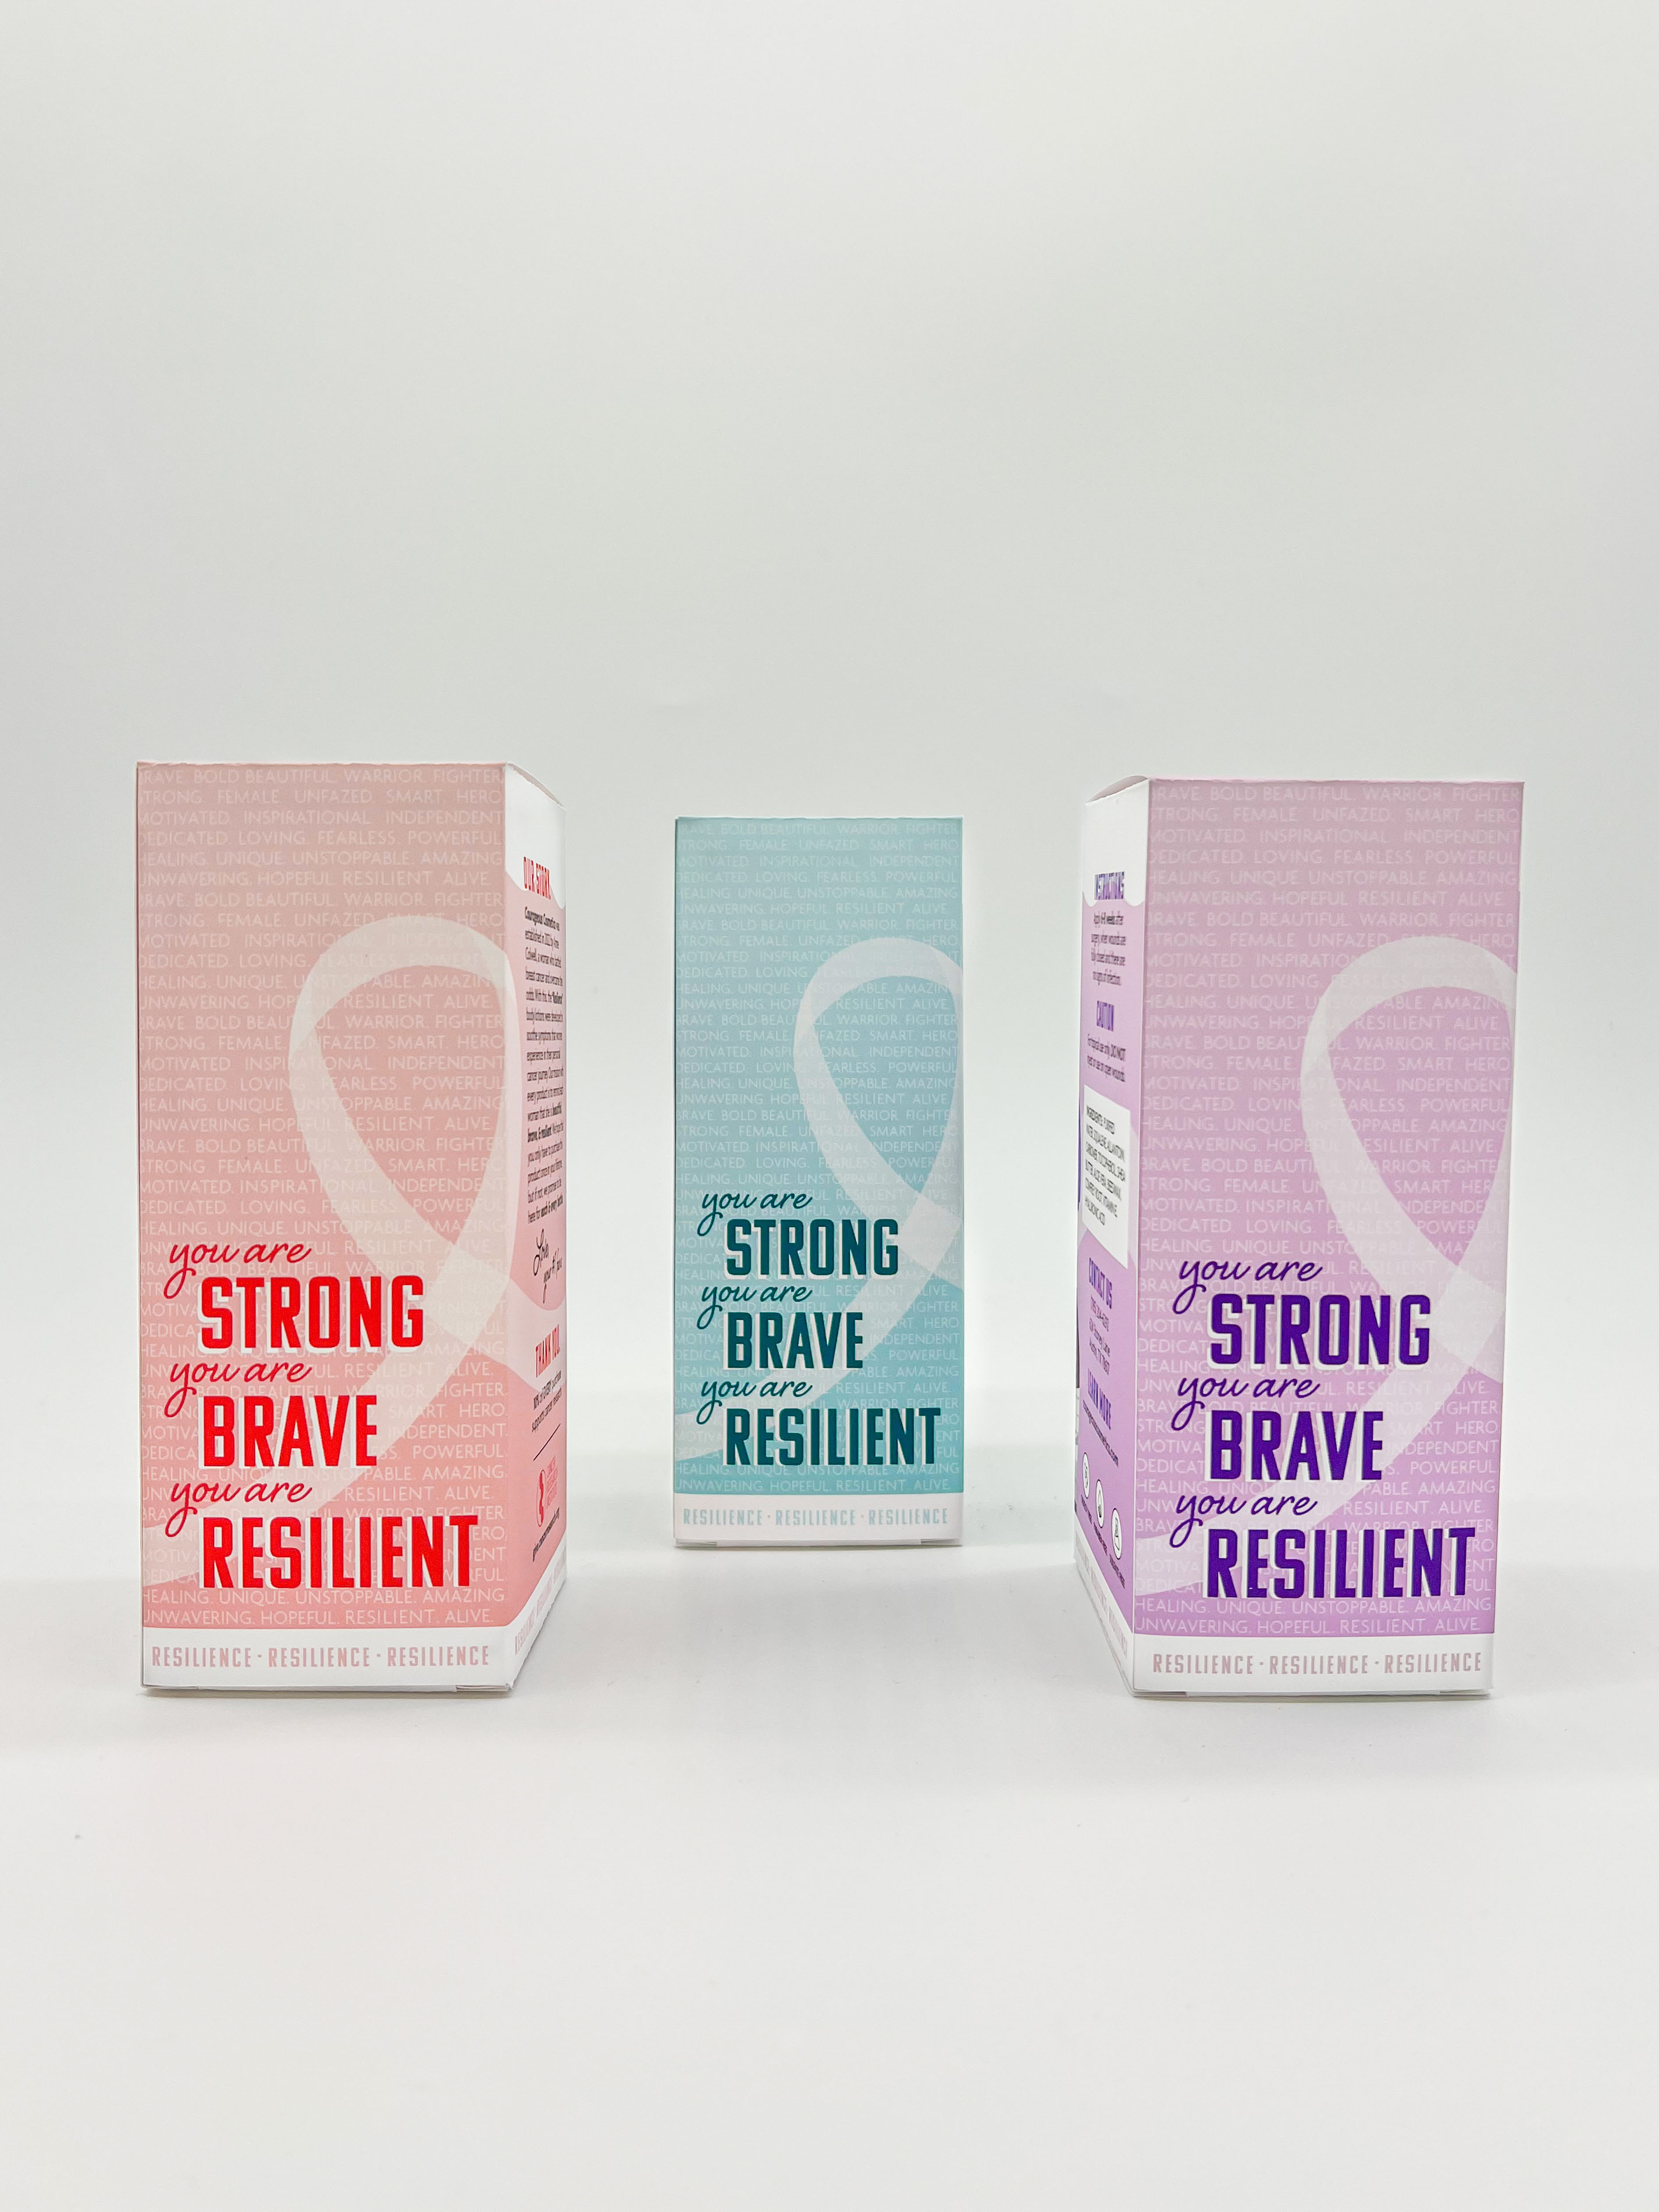 Courageous Cosmetics: Resilience Body Lotions<br>2022<br>Epson InkJet Print<br>6 x 2.5 x 2.5